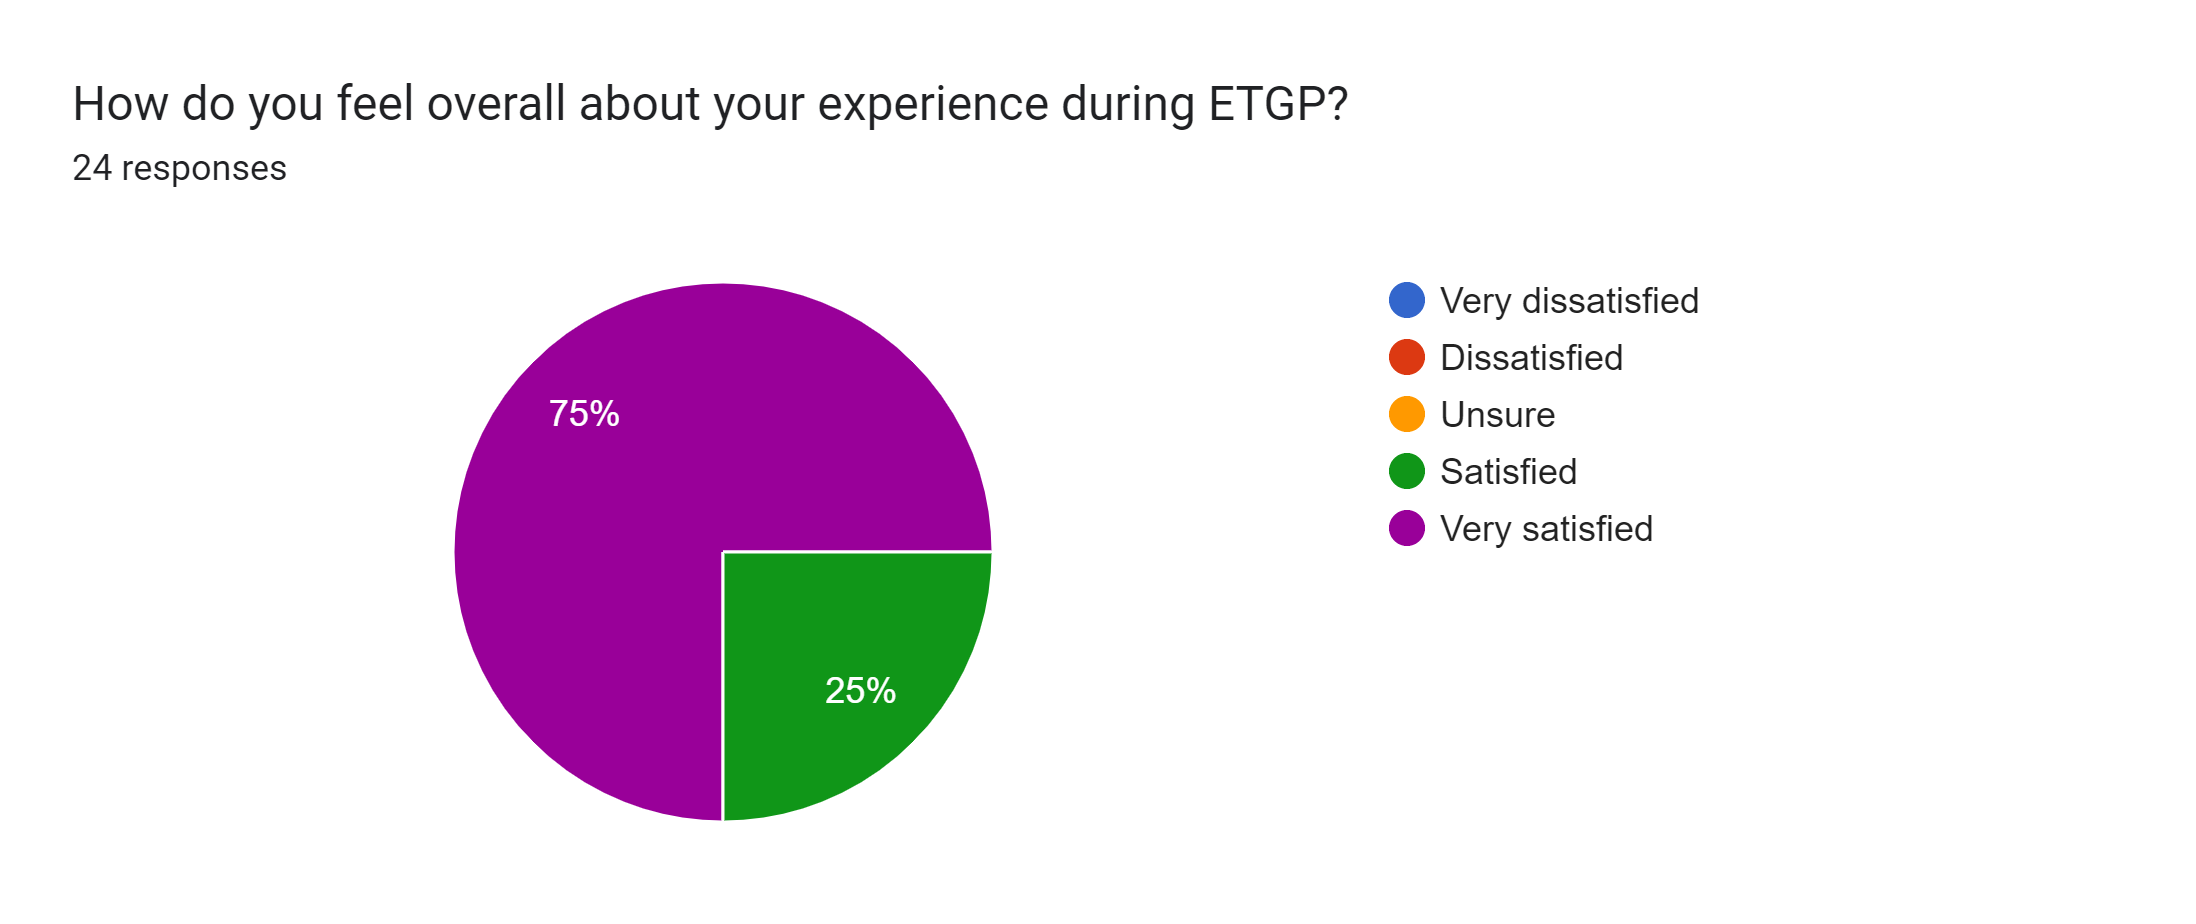 Forms response chart. Question title: How do you feel overall about your experience during ETGP?. Number of responses: 24 responses.